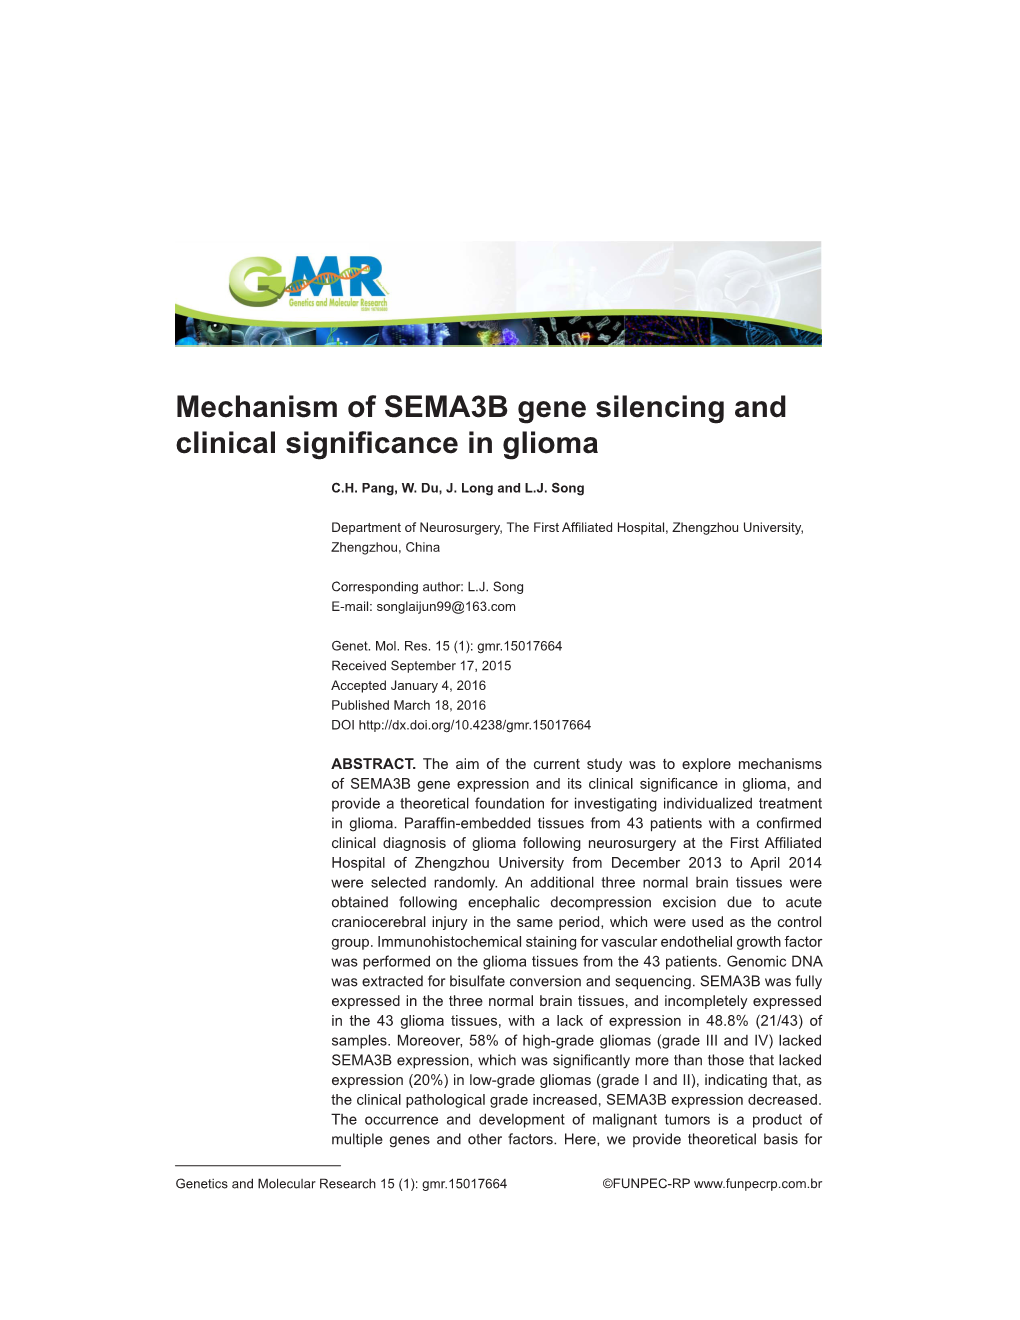 Mechanism of SEMA3B Gene Silencing and Clinical Significance in Glioma